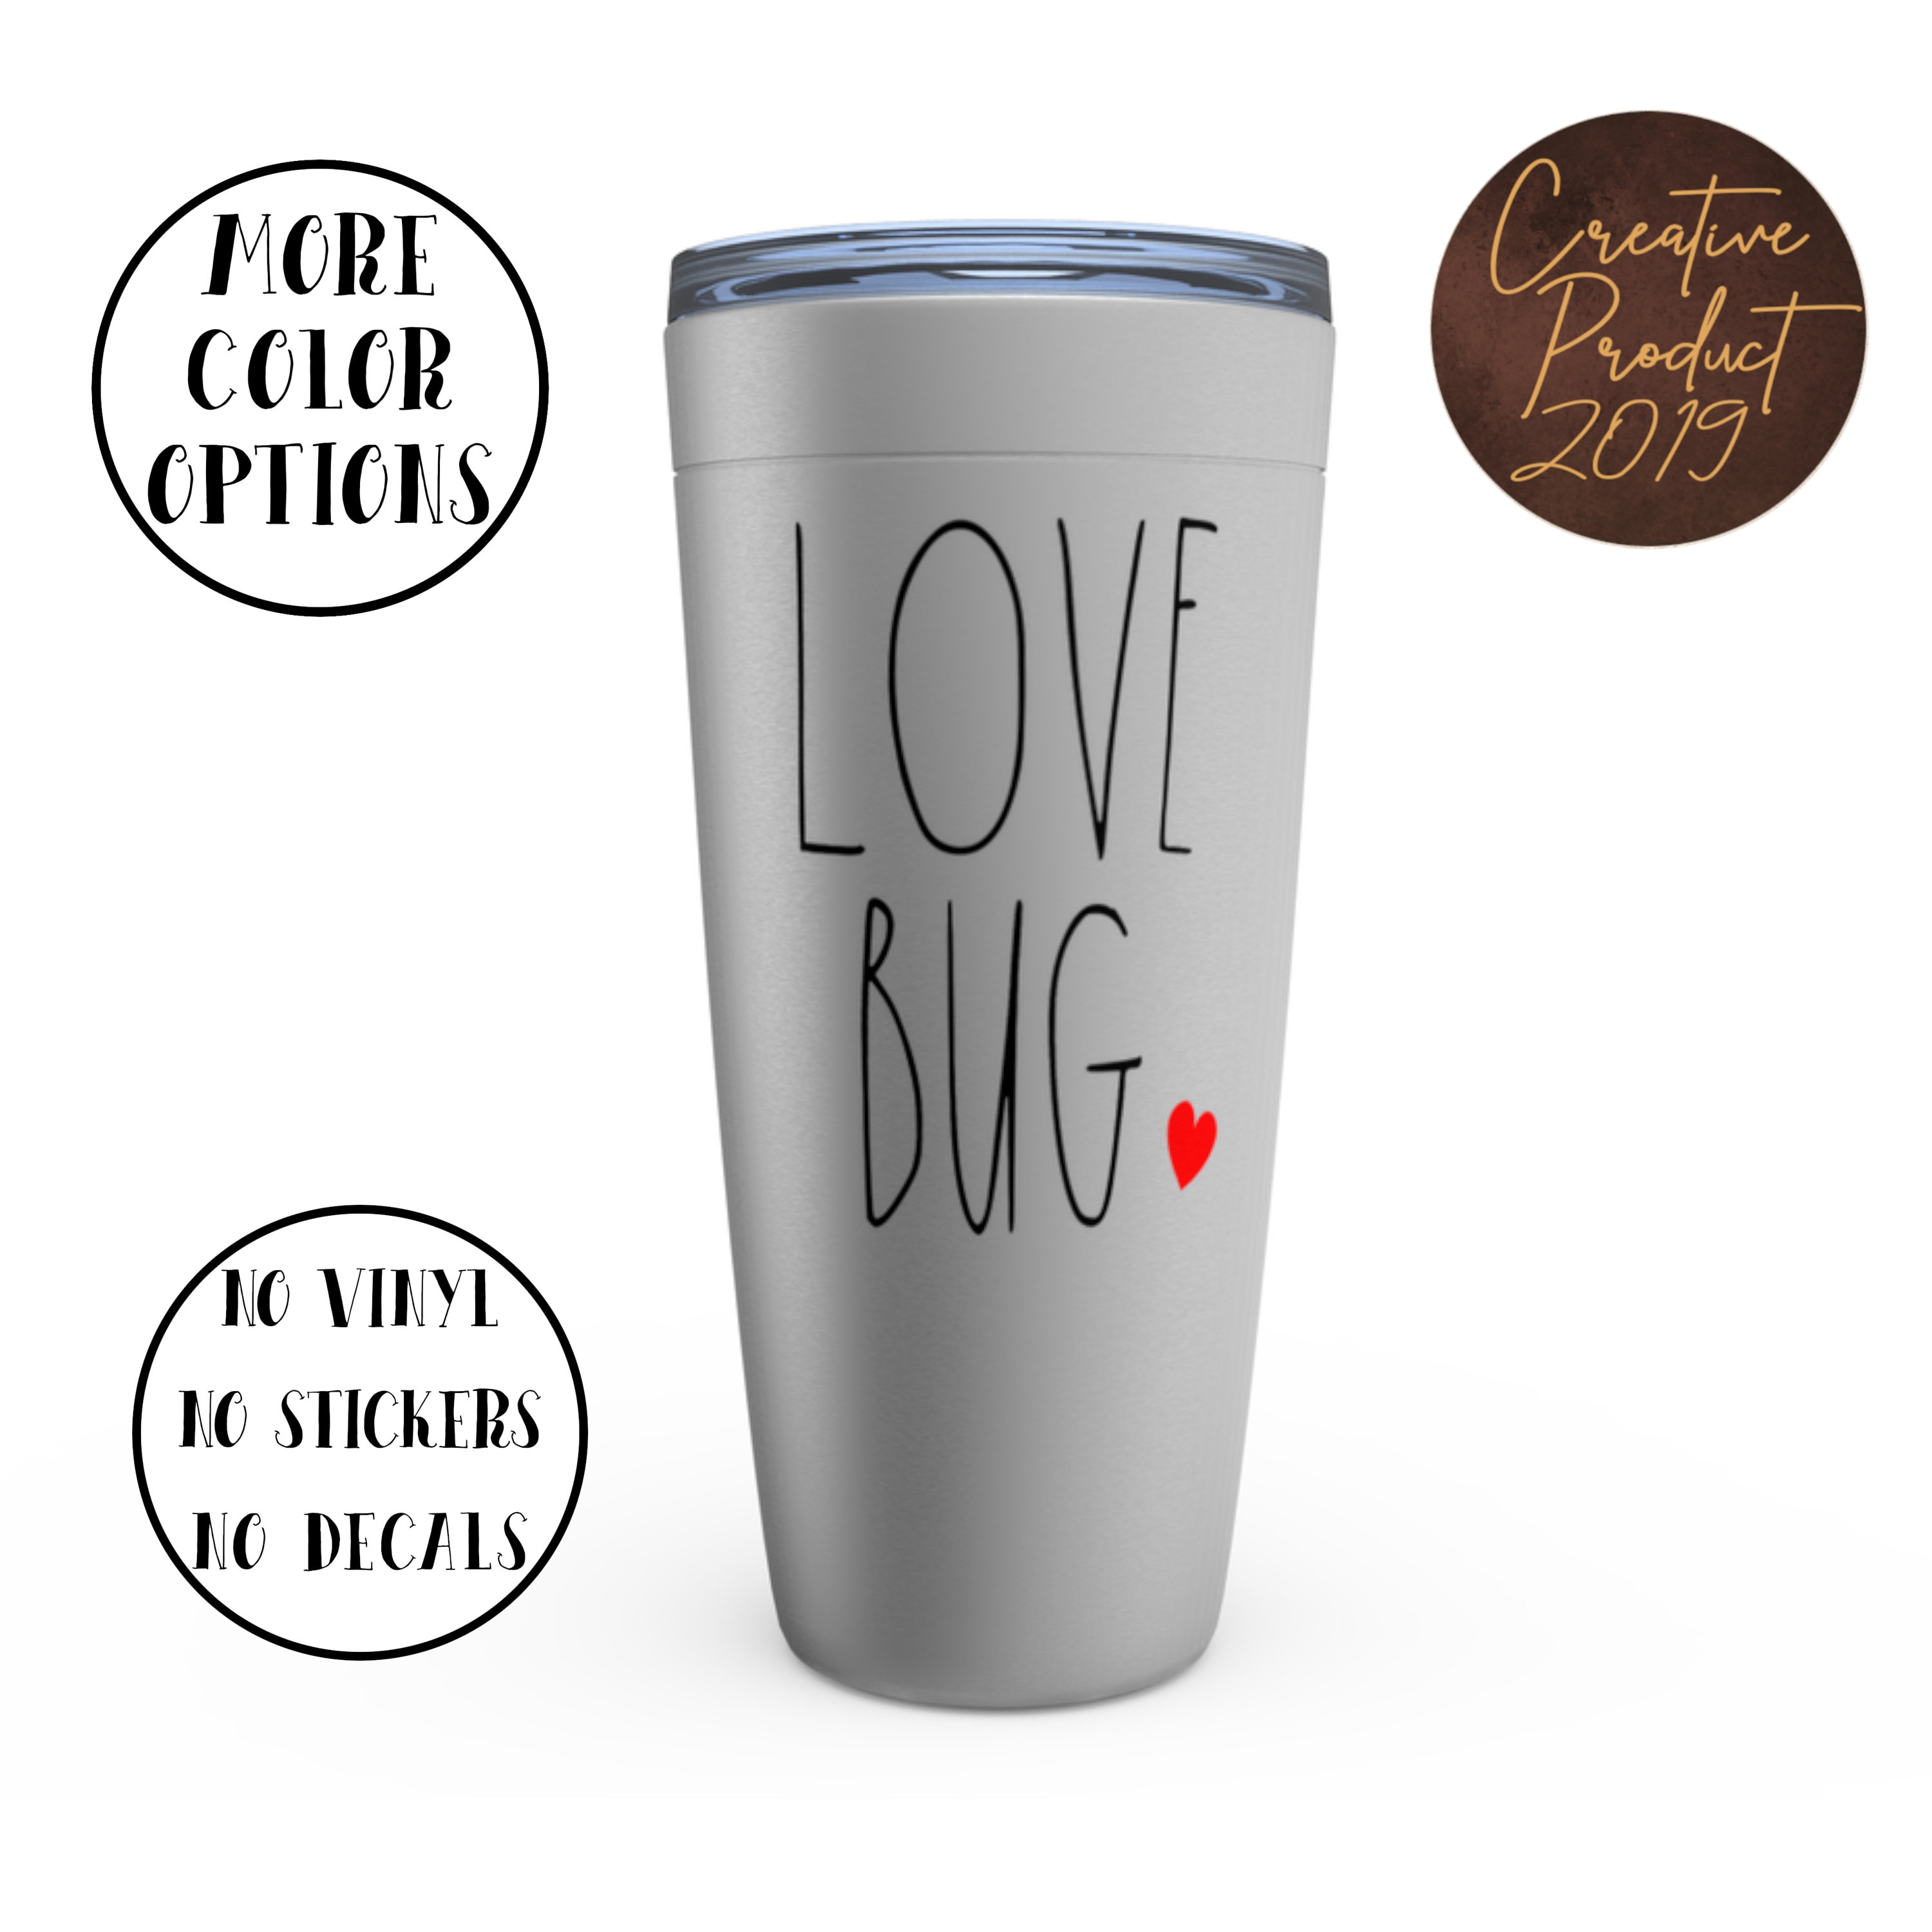 Rae Dunn Insulated Stainless Steel Tumblers w/Lids - Hot Mess, But Fir –  Aura In Pink Inc.